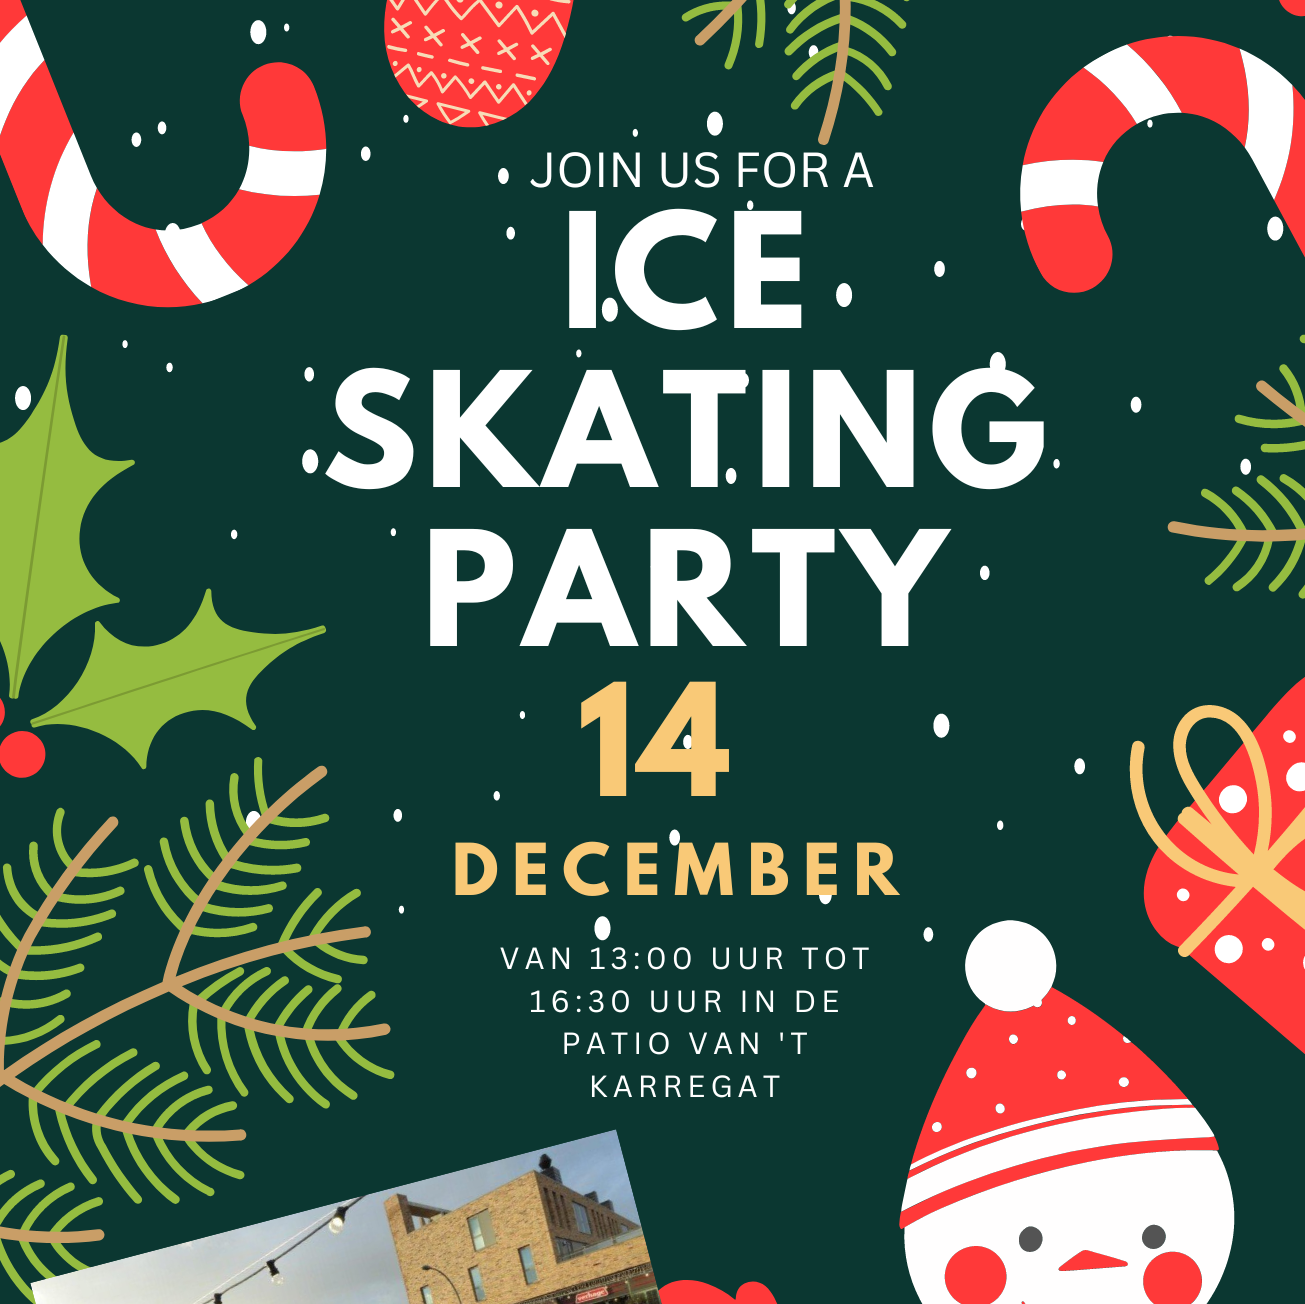 ICE SKATING PARTY